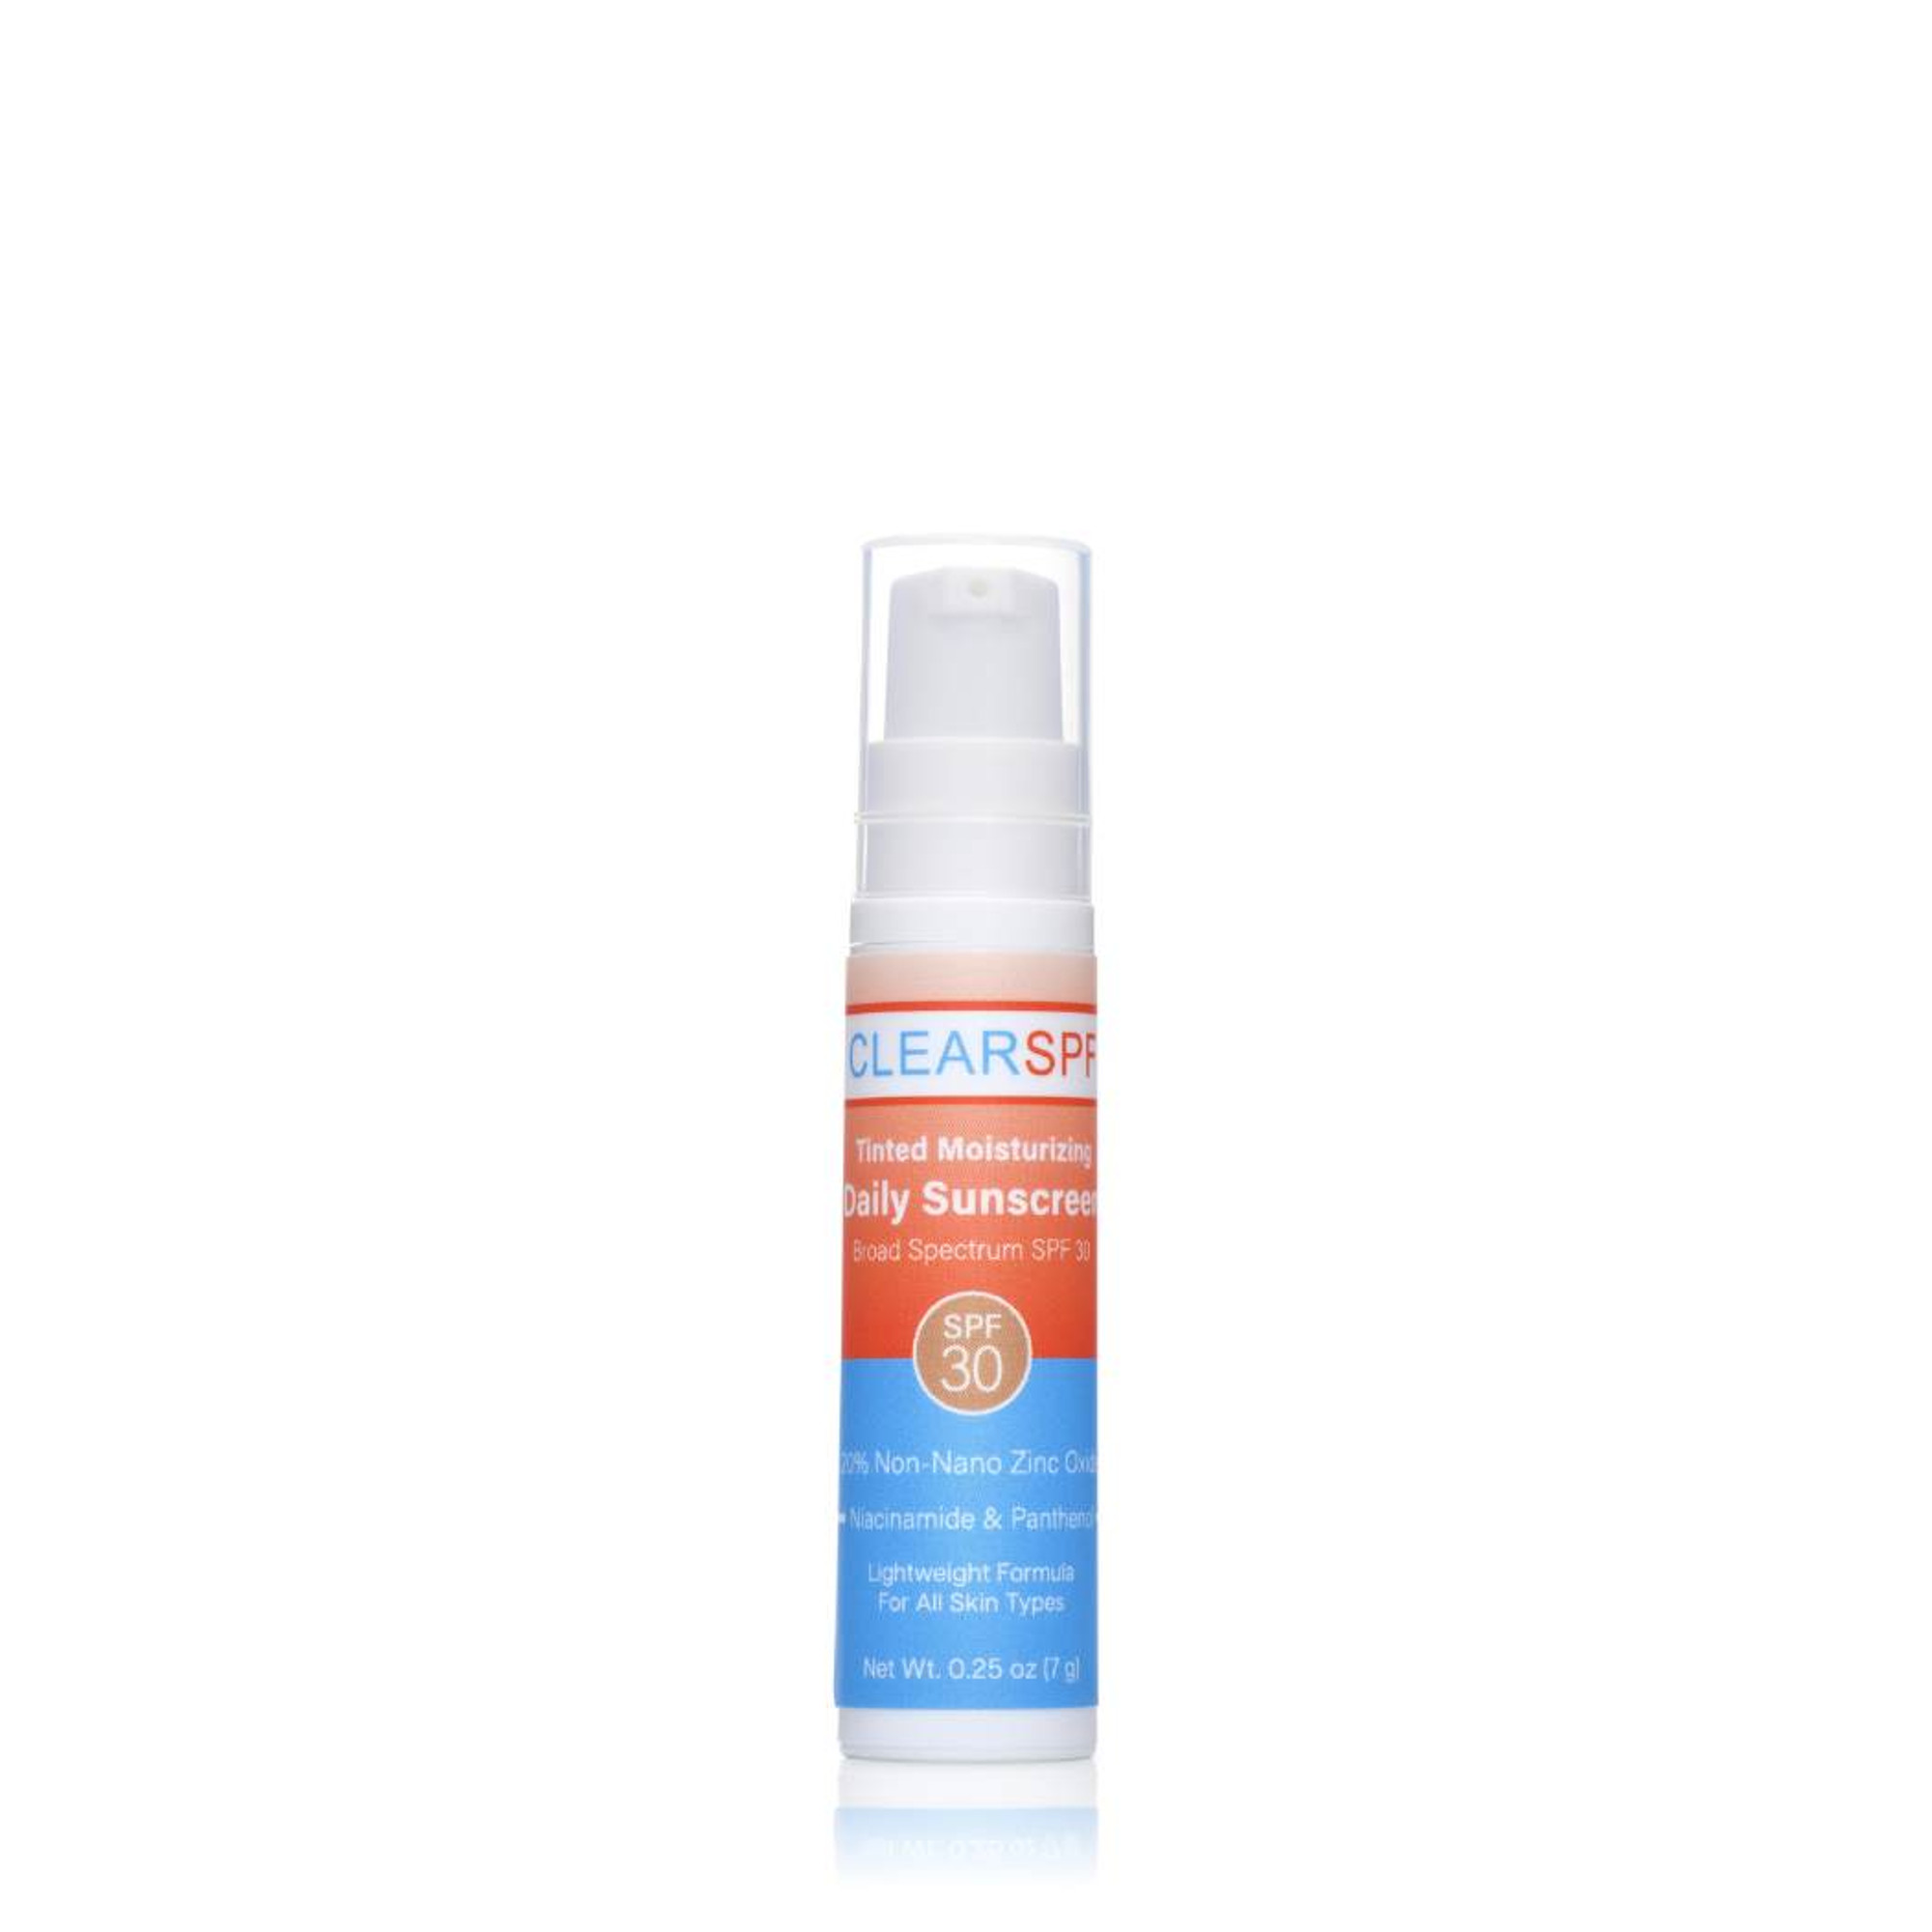 Deluxe Sample Size ClearSPF Tinted Daily Sunscreen - 7g